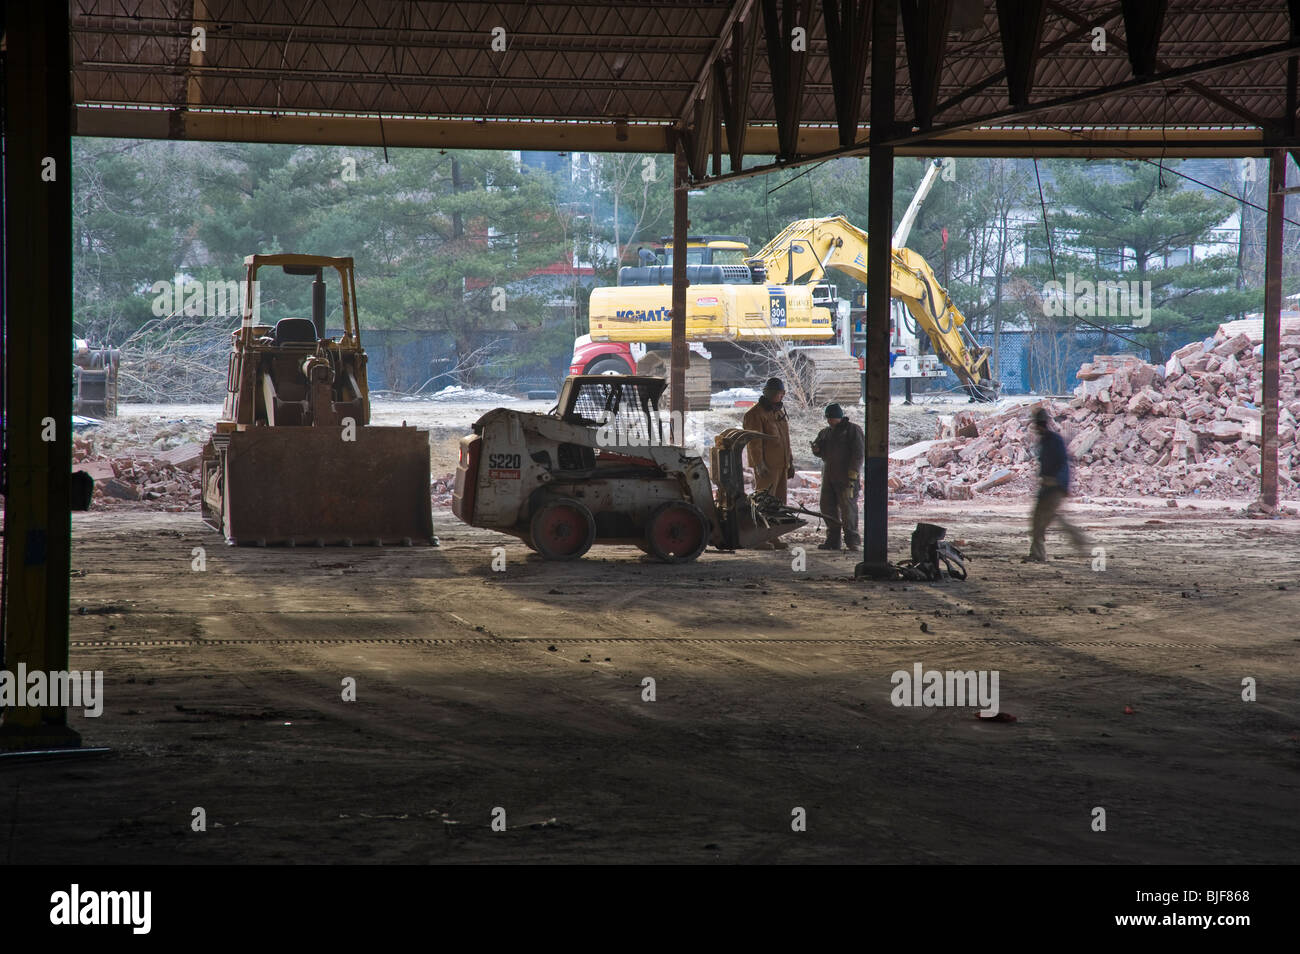 Heavy Machinery & Workers At Building Demolition, Philadelphia, USA Stock Photo